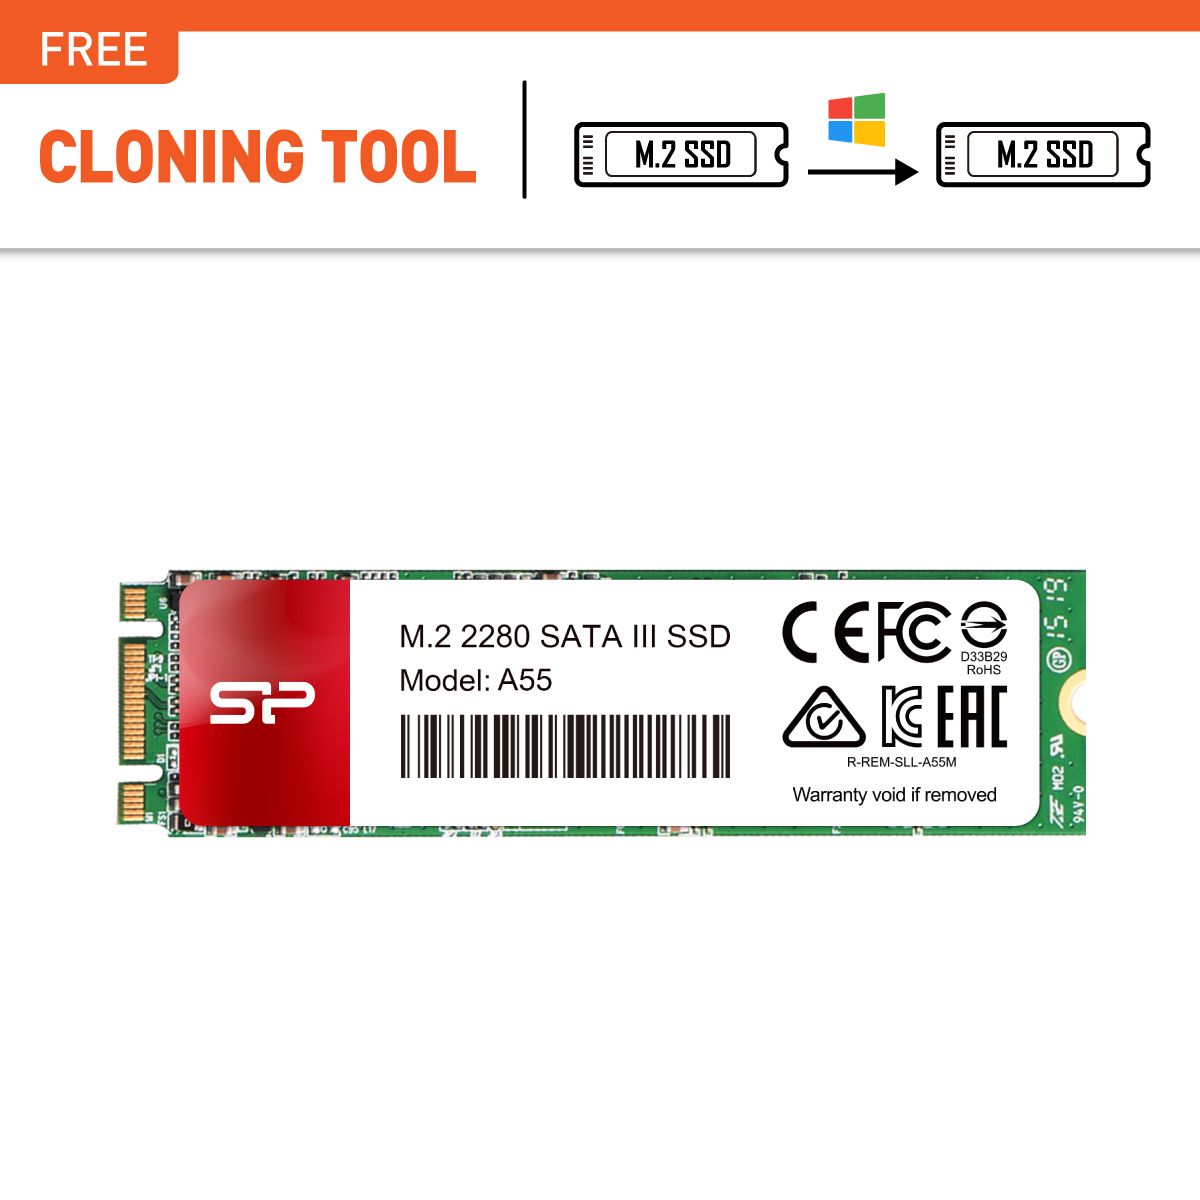 Grab this 1TB Silicon Power SATA SSD for just £31 from